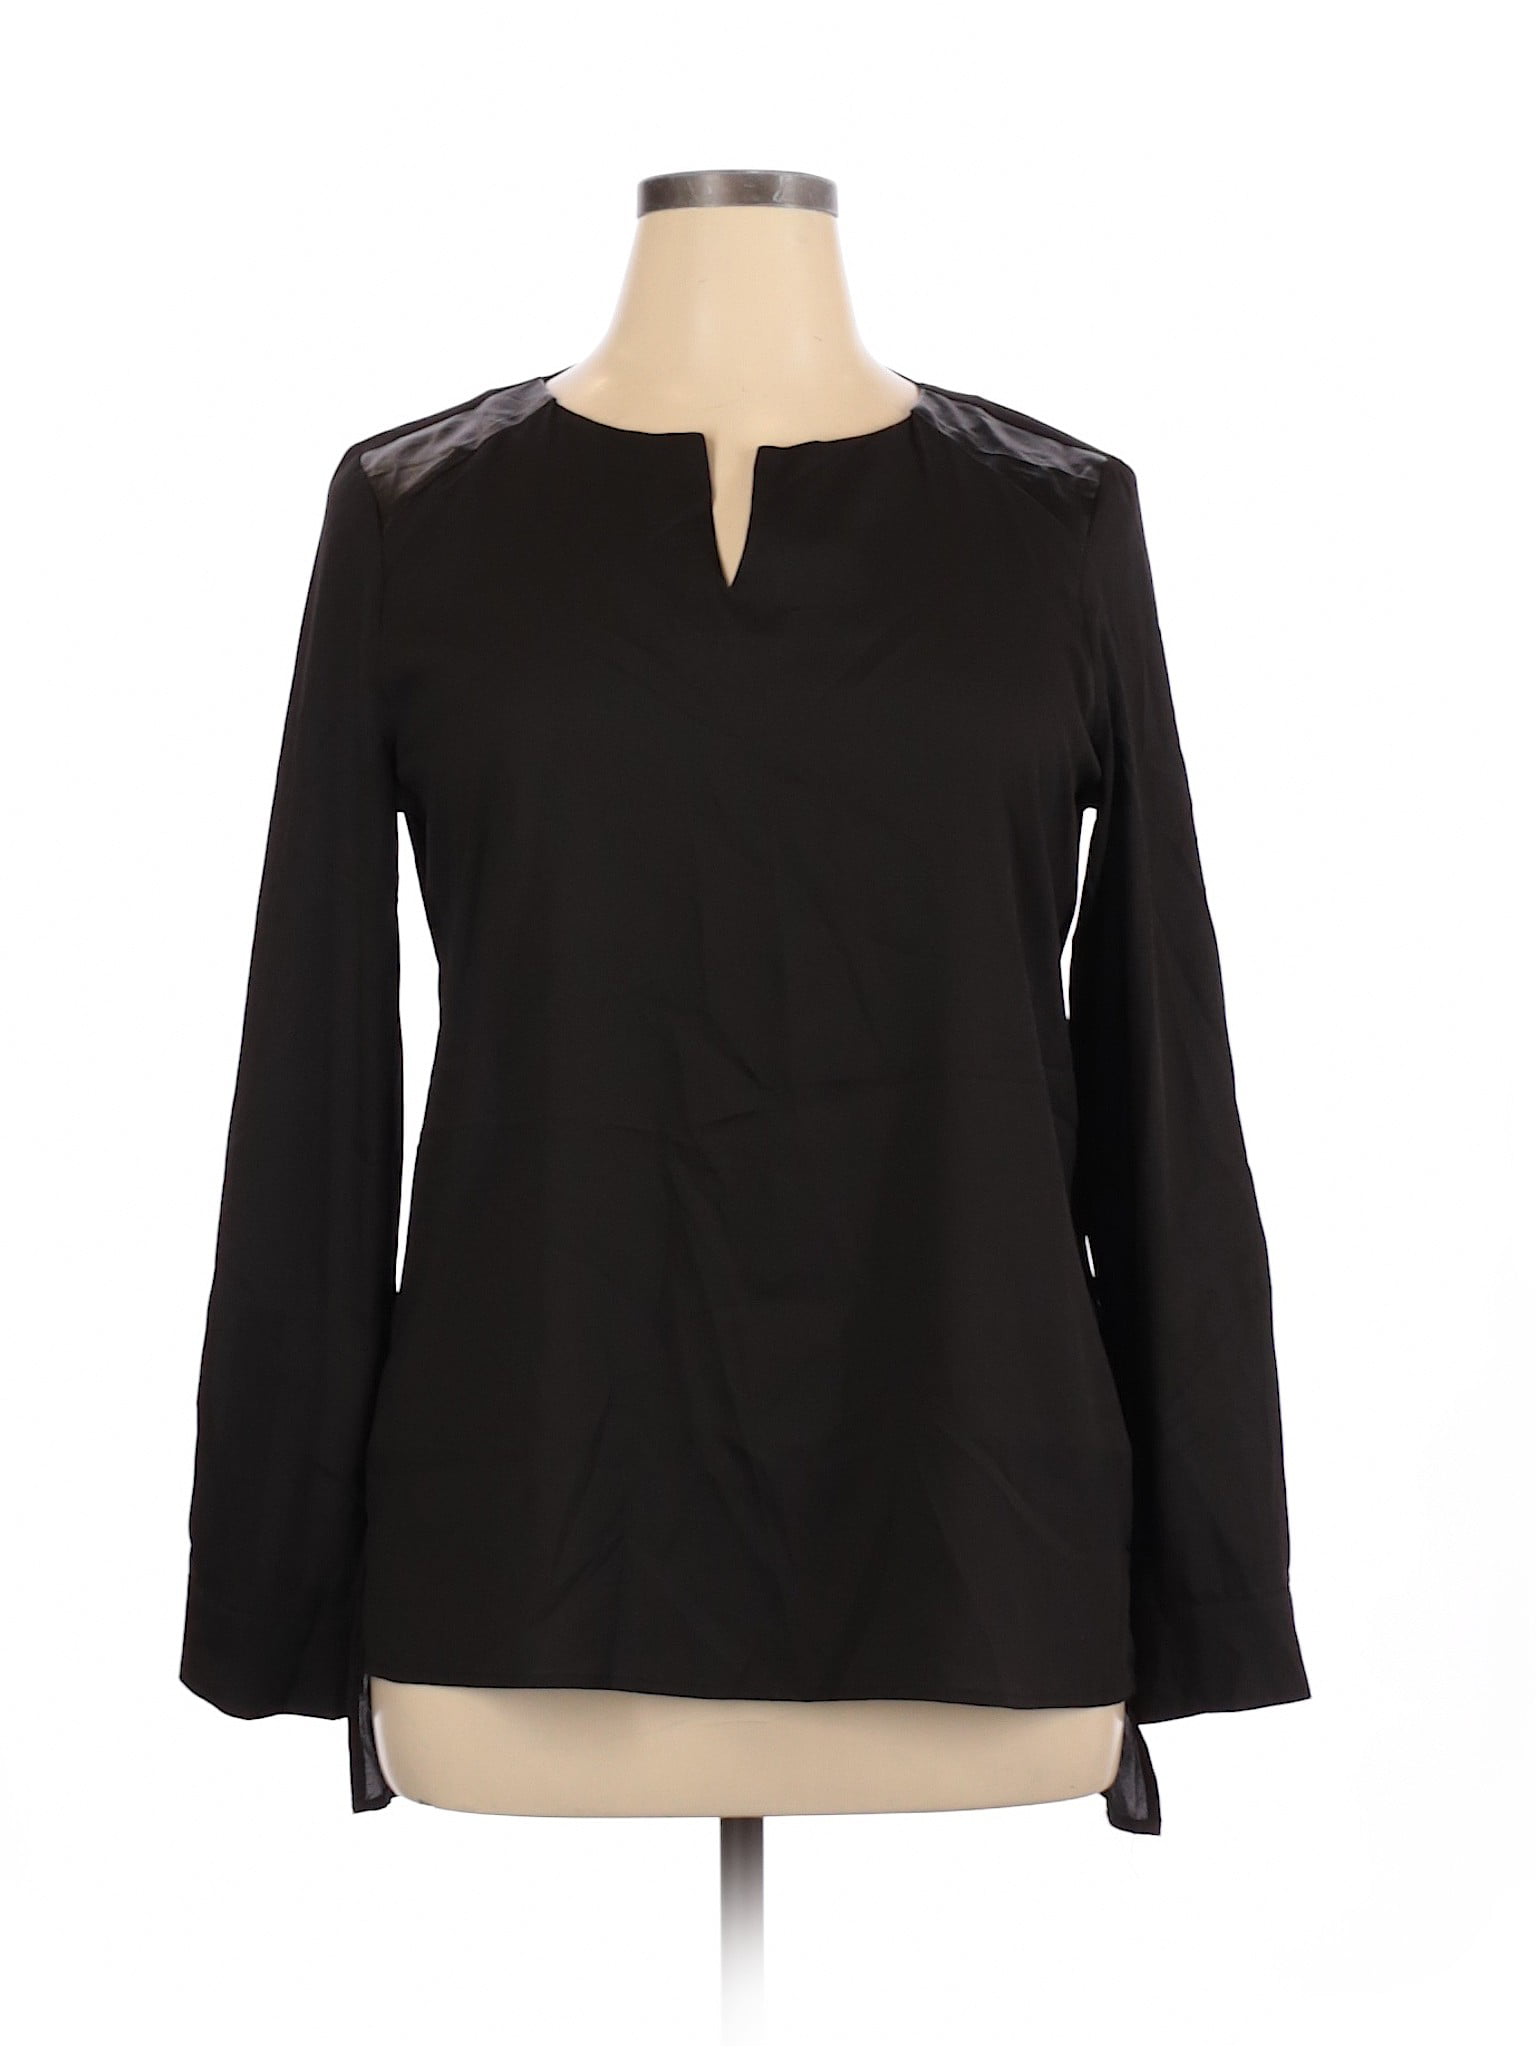 Marc New York - Pre-Owned Marc New York Women's Size L Long Sleeve ...